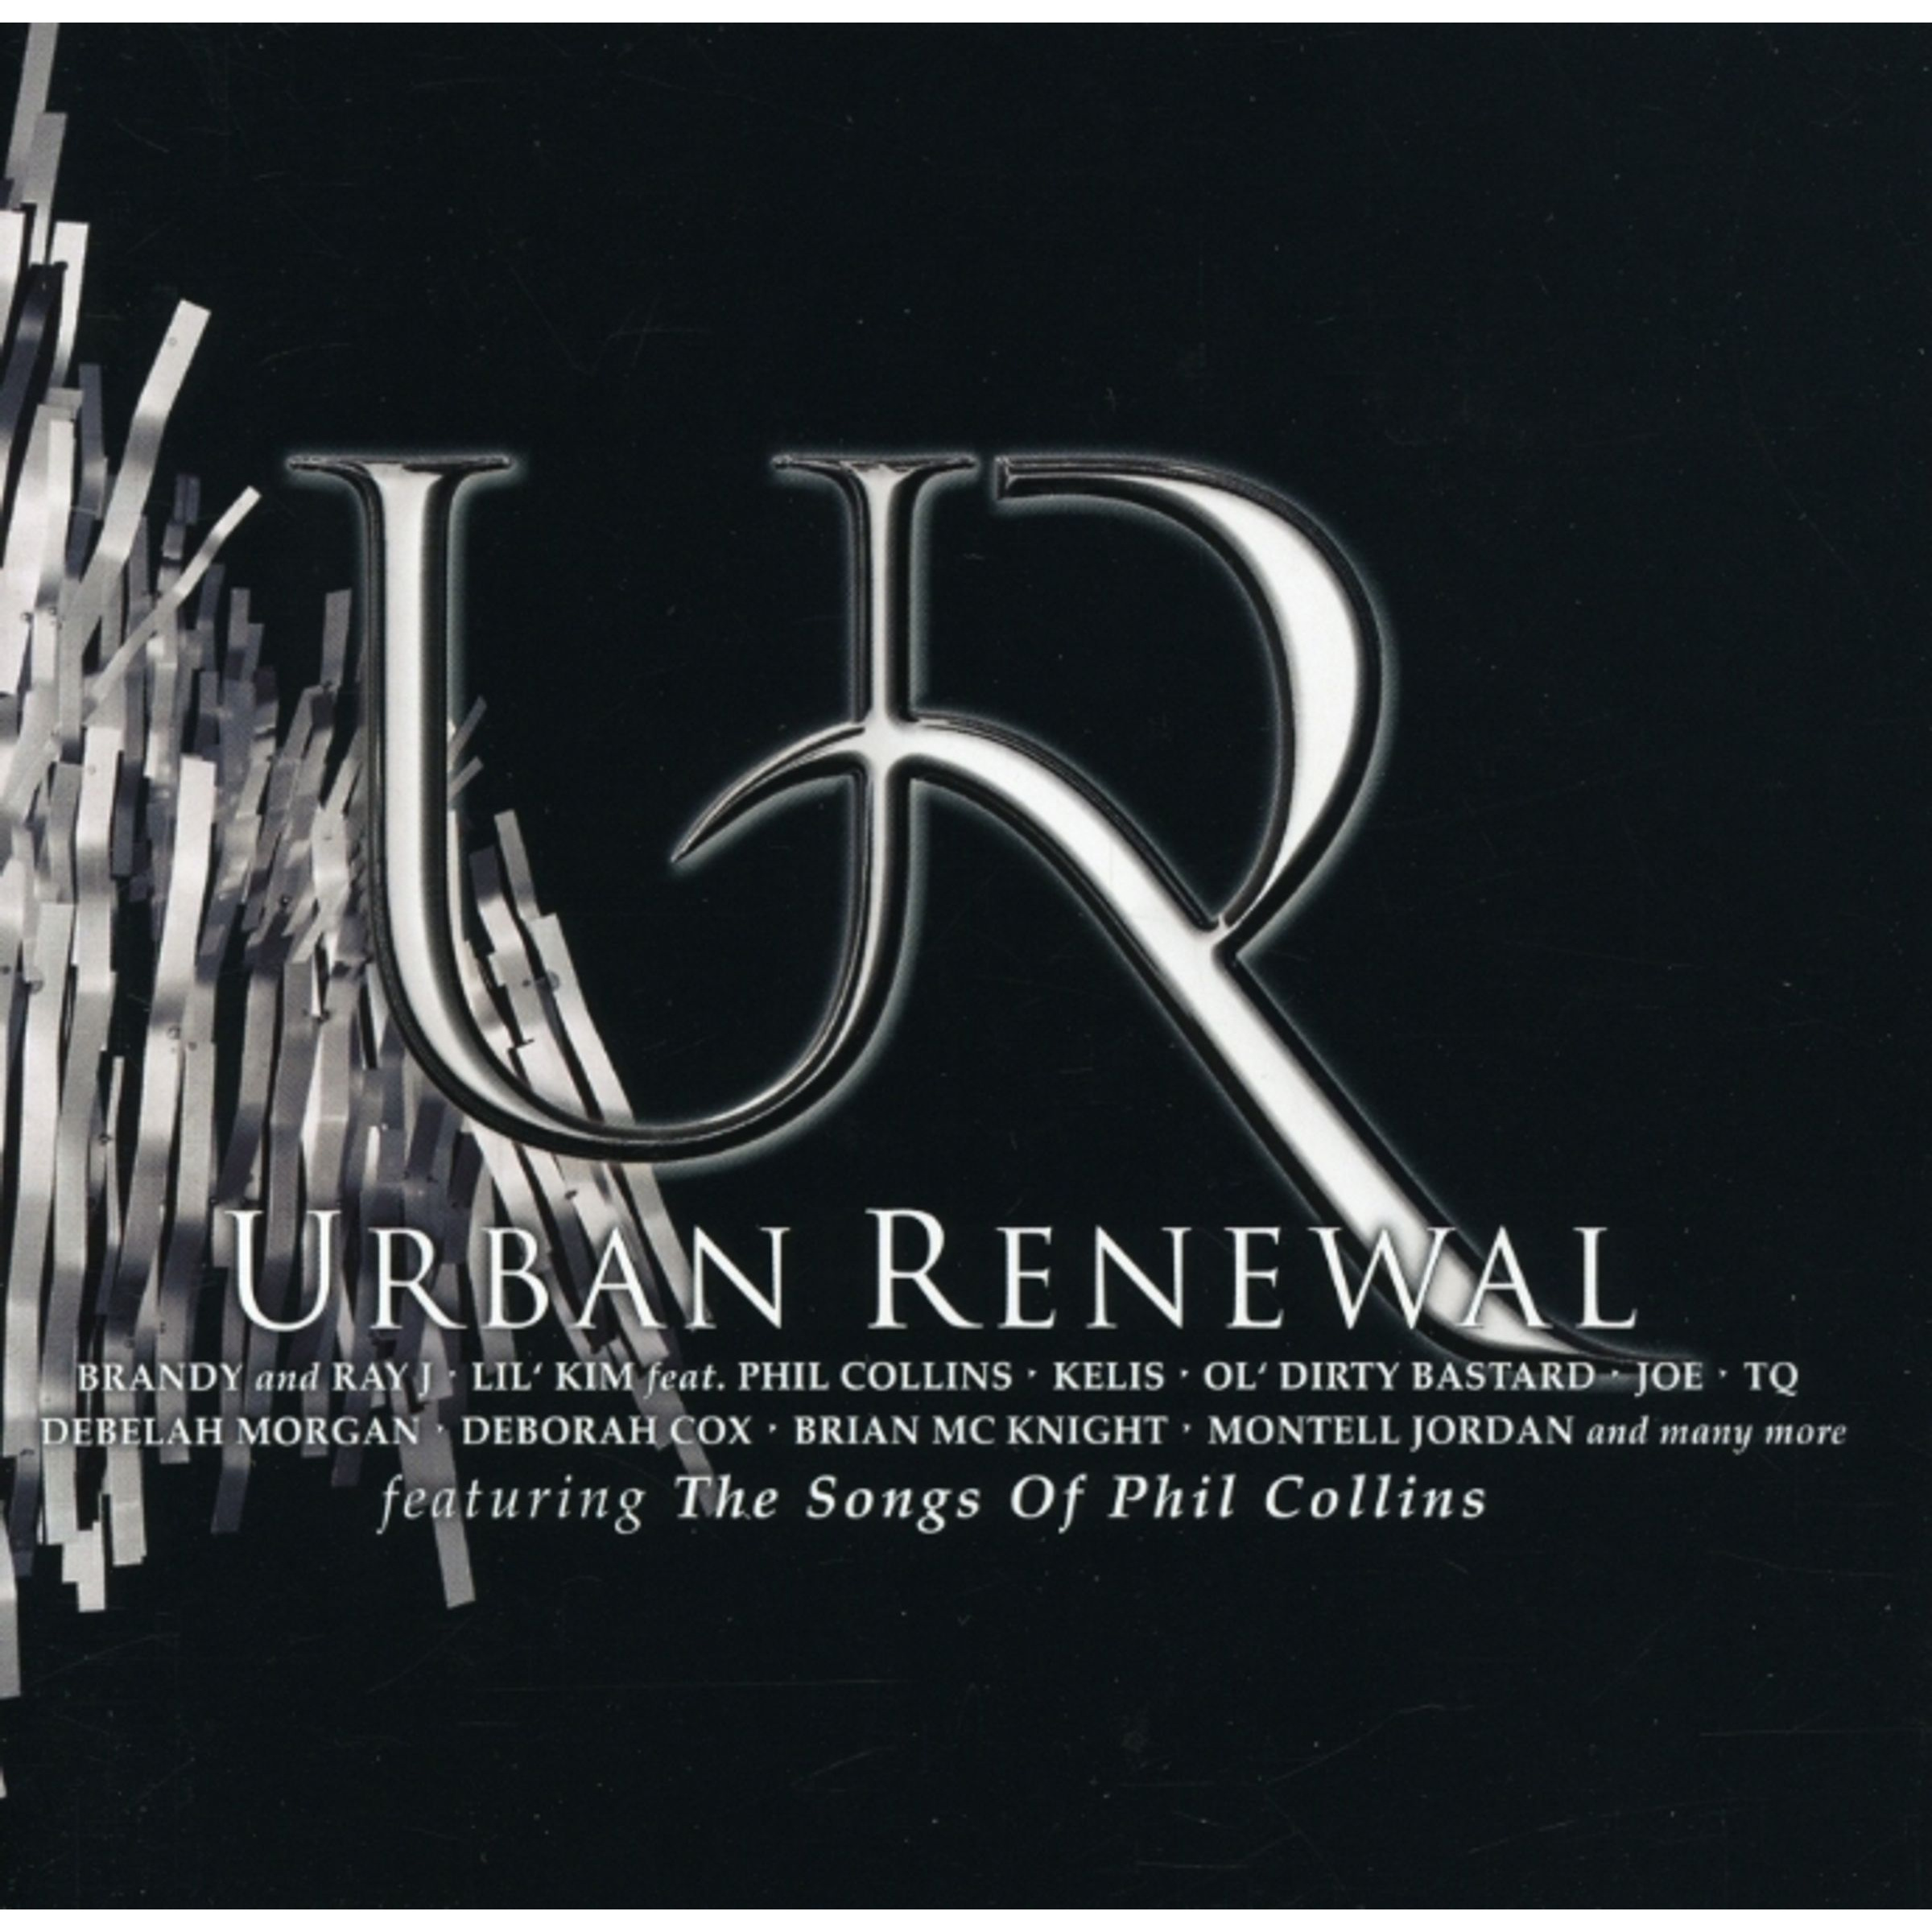 URBAN RENEWAL (FEATURING THE SONGS OF PHIL COLLINS)